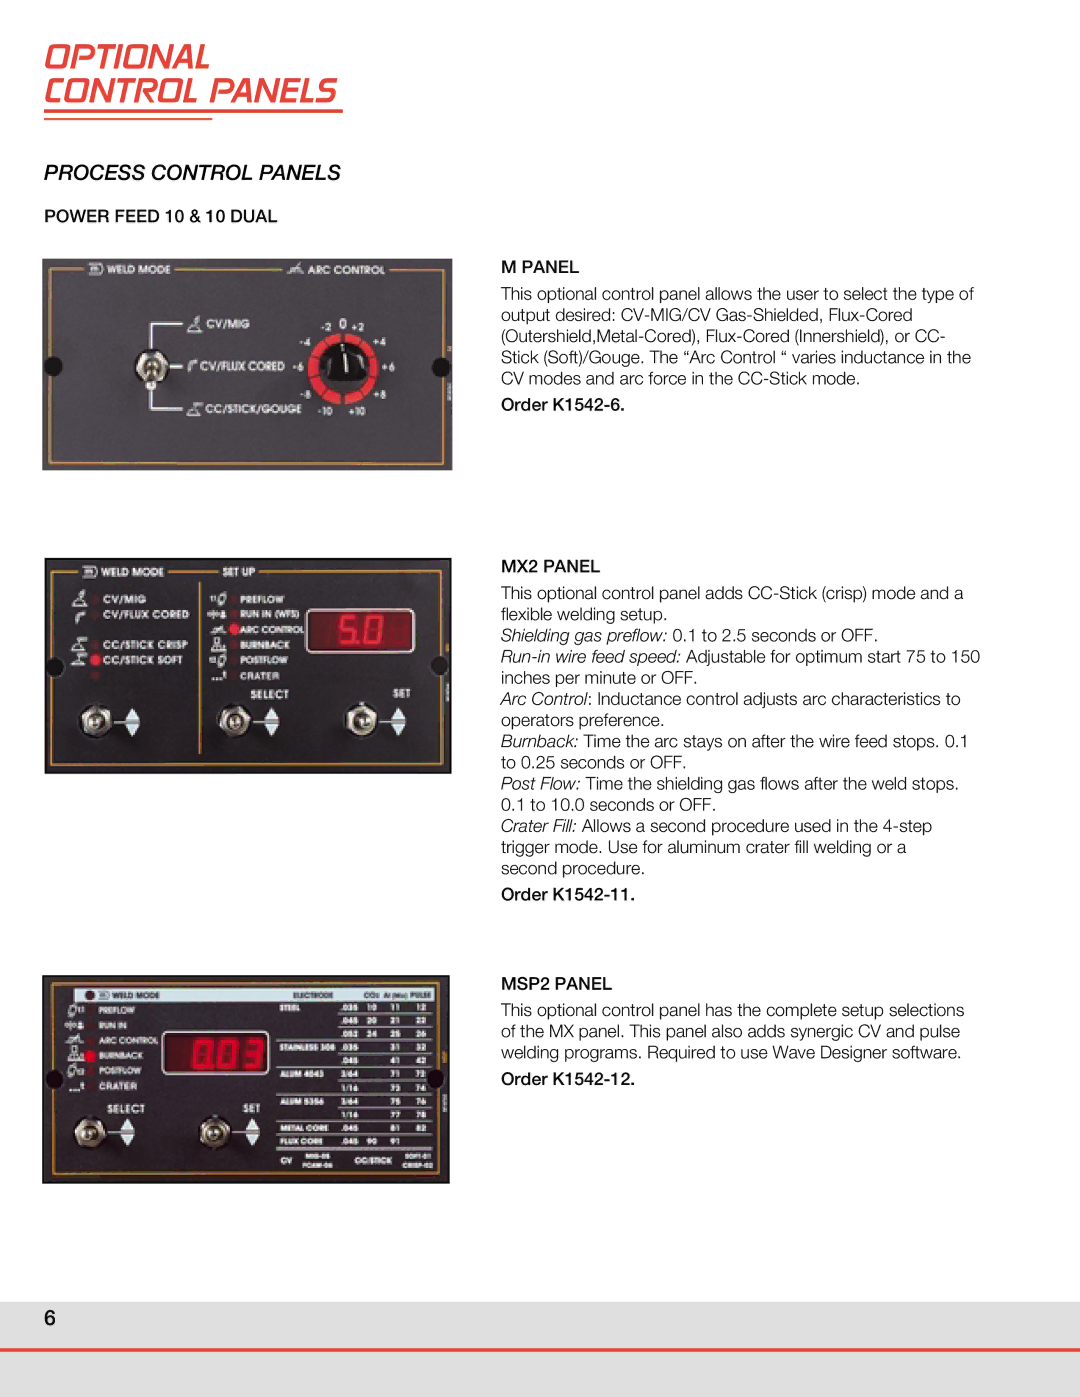 Lincoln Electric WELDING SYSTEMS manual Power Feed 10 & 10 Dual Panel, MX2 Panel, MSP2 Panel 